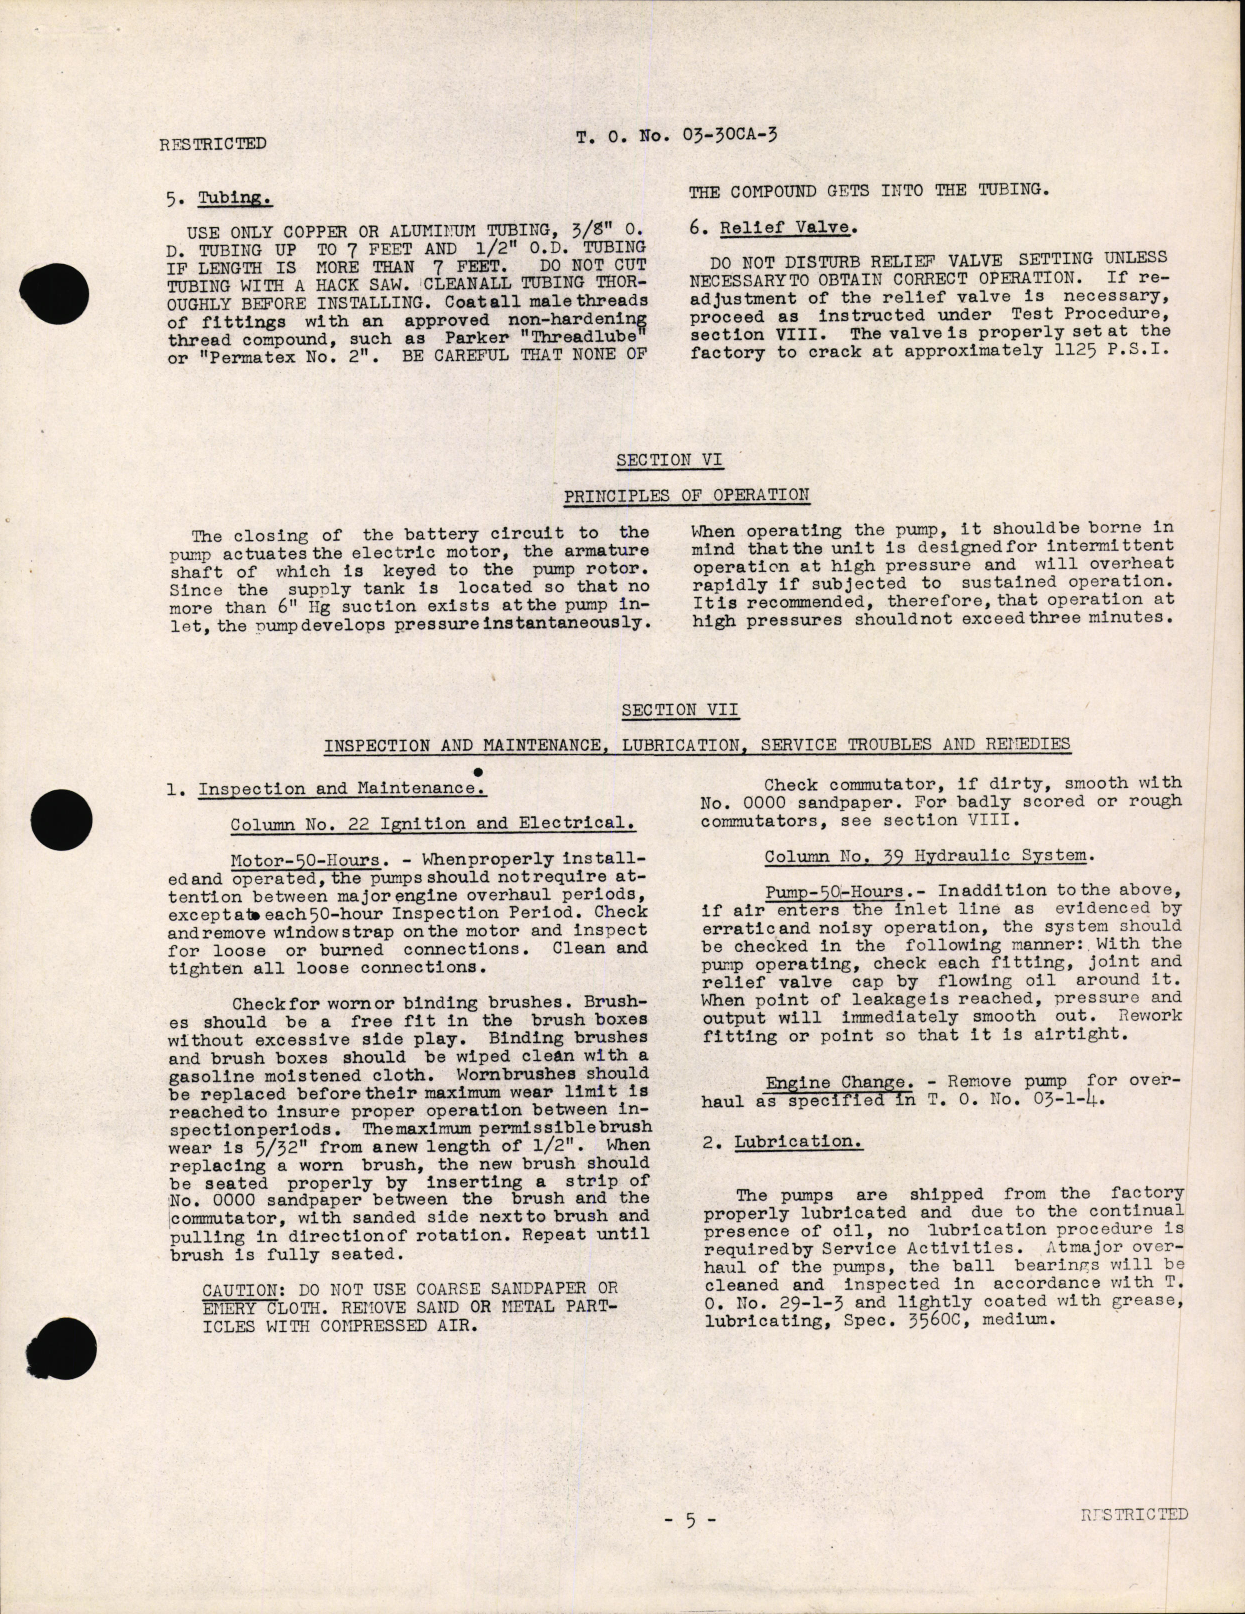 Sample page 7 from AirCorps Library document: Handbook of Instructions for Motor-Driven hydraulic Pump (Gear type)